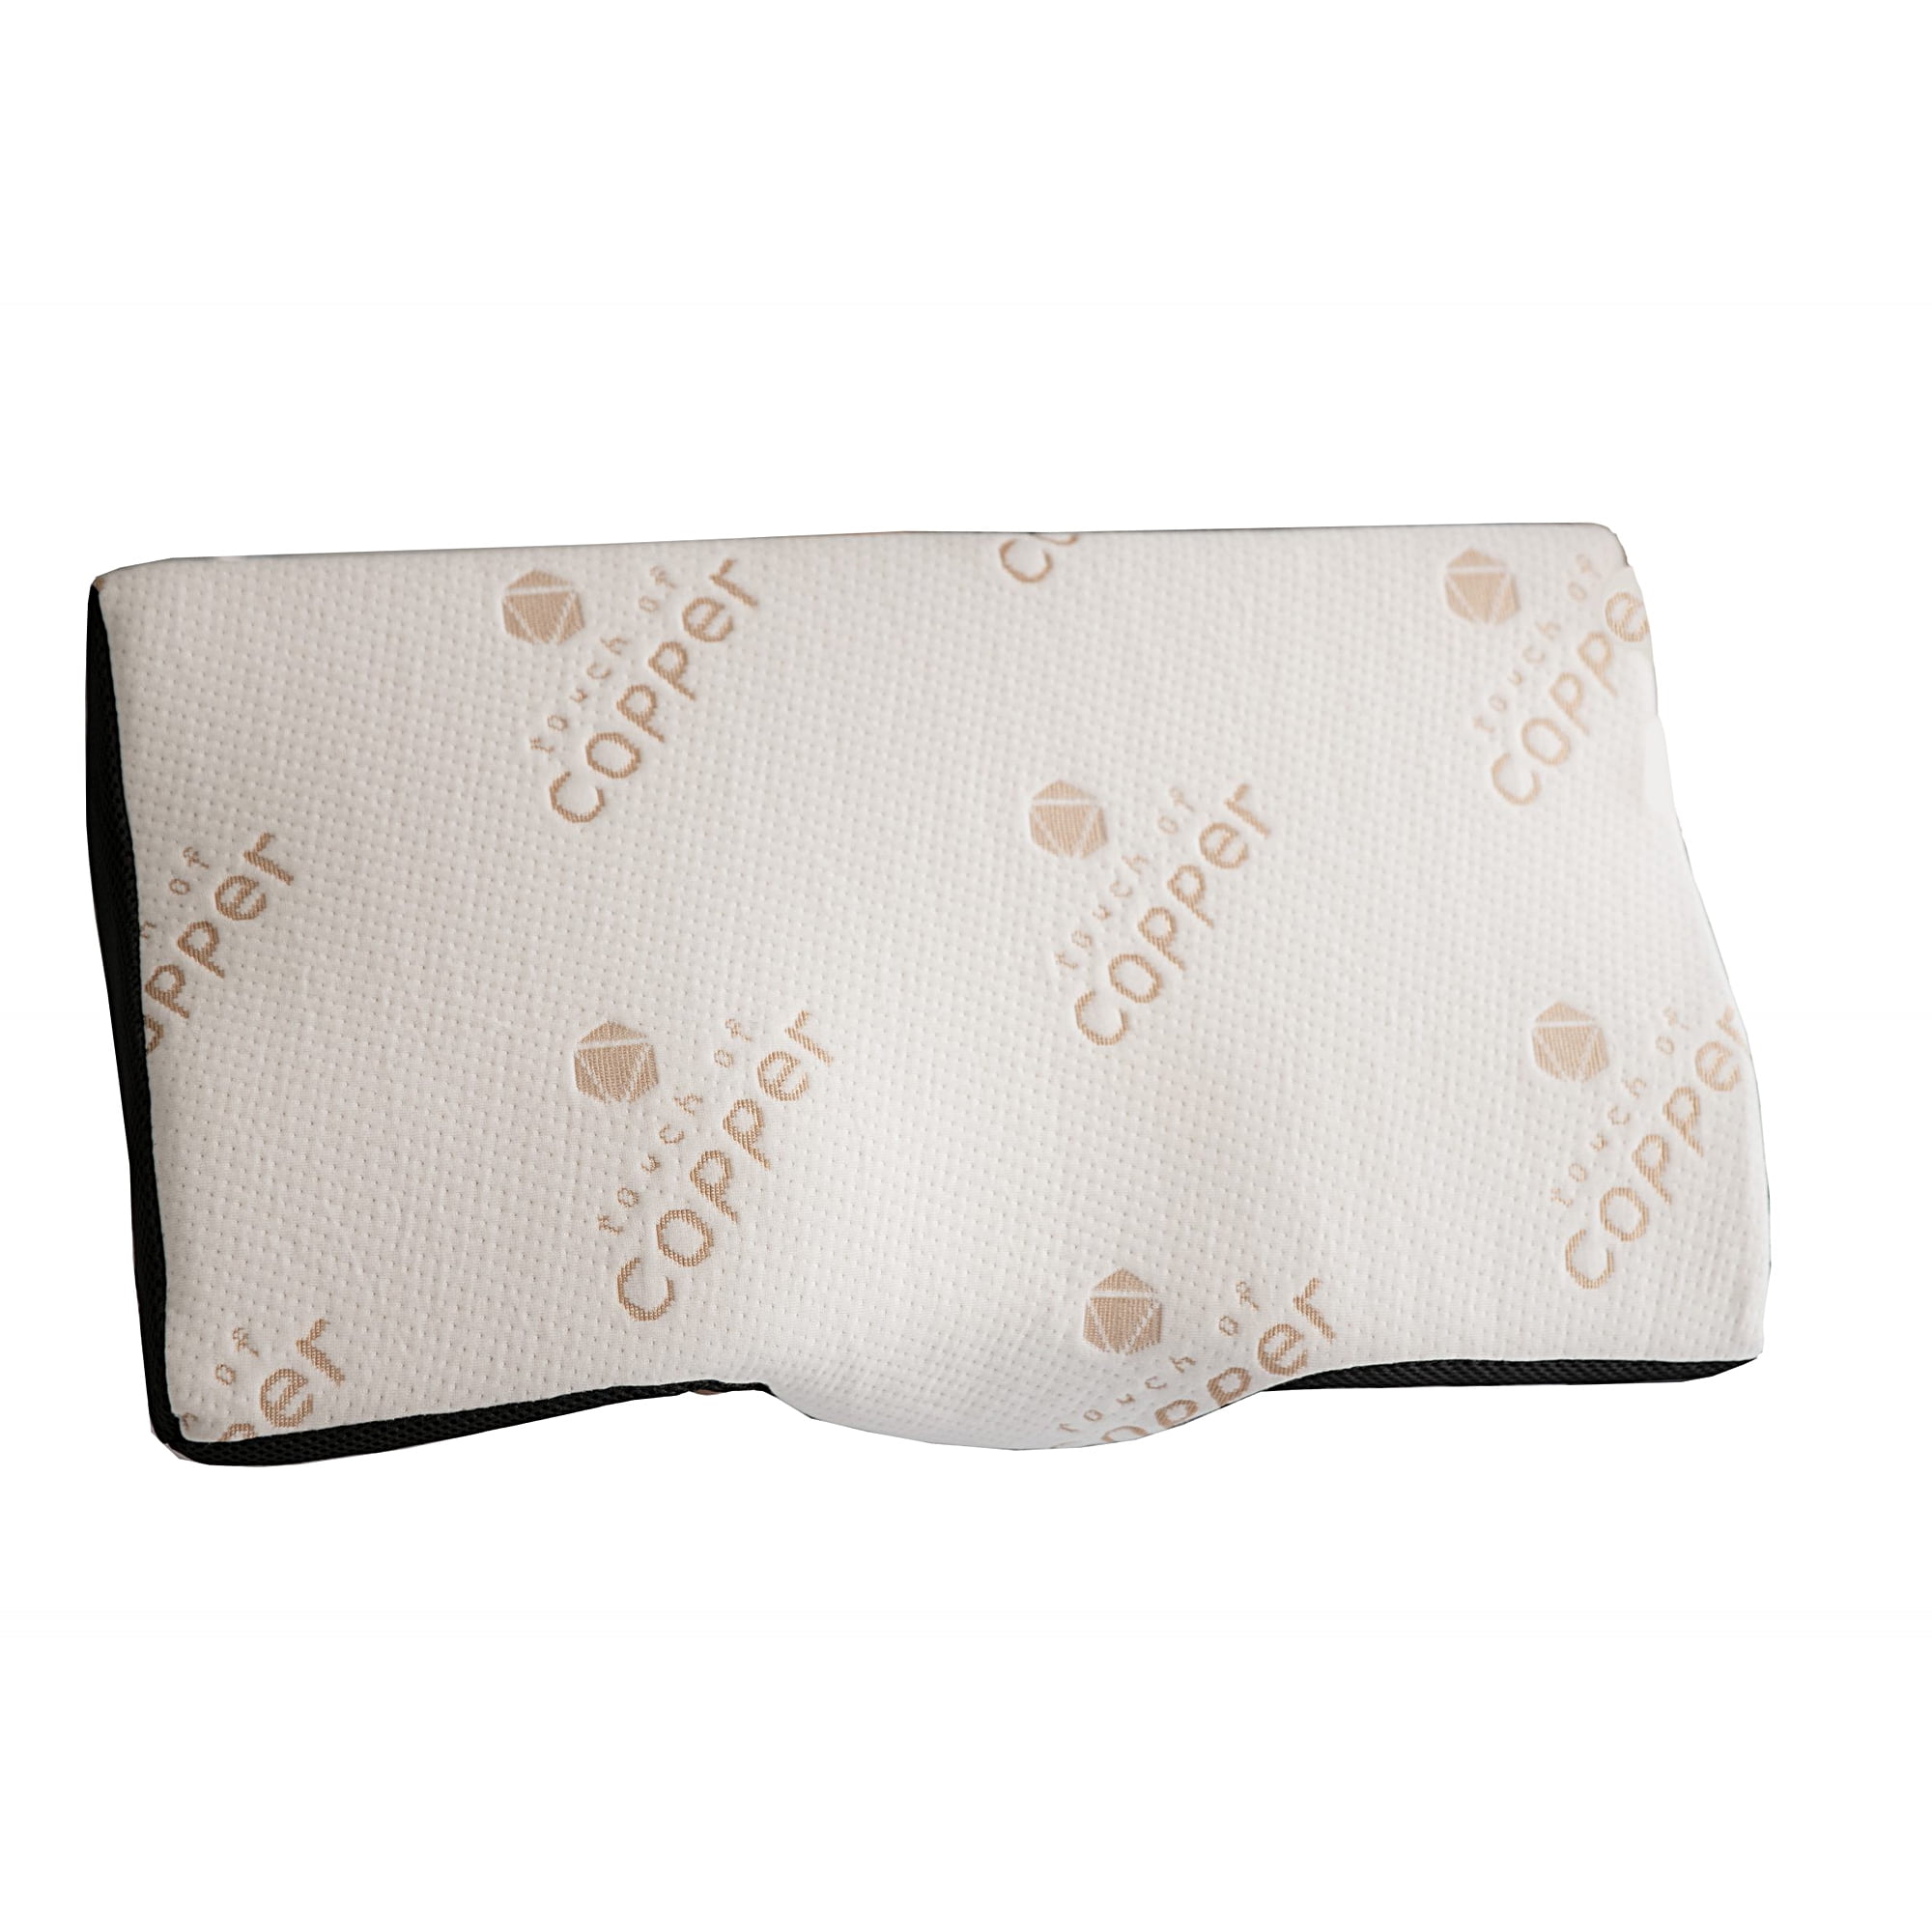 Dr Pillow Copper Gel 2 Pack Pillow, Size: One size, White